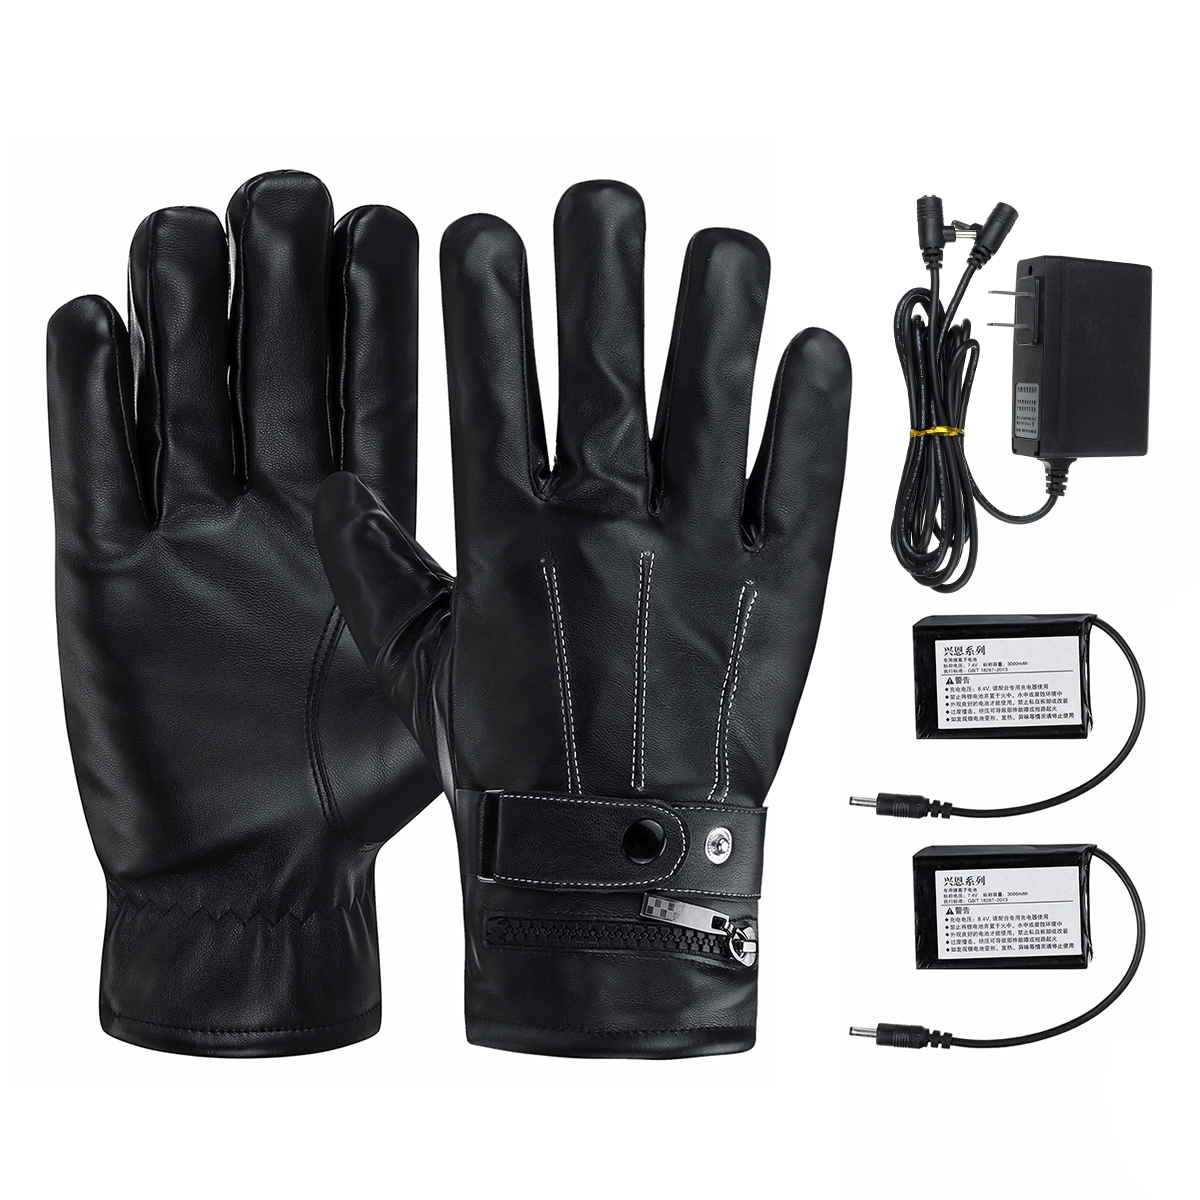 

7.4V 3000mah Battery Electric Heated Gloves Warm Winter Motorcycle Gloves Touch Screen Waterproof Black